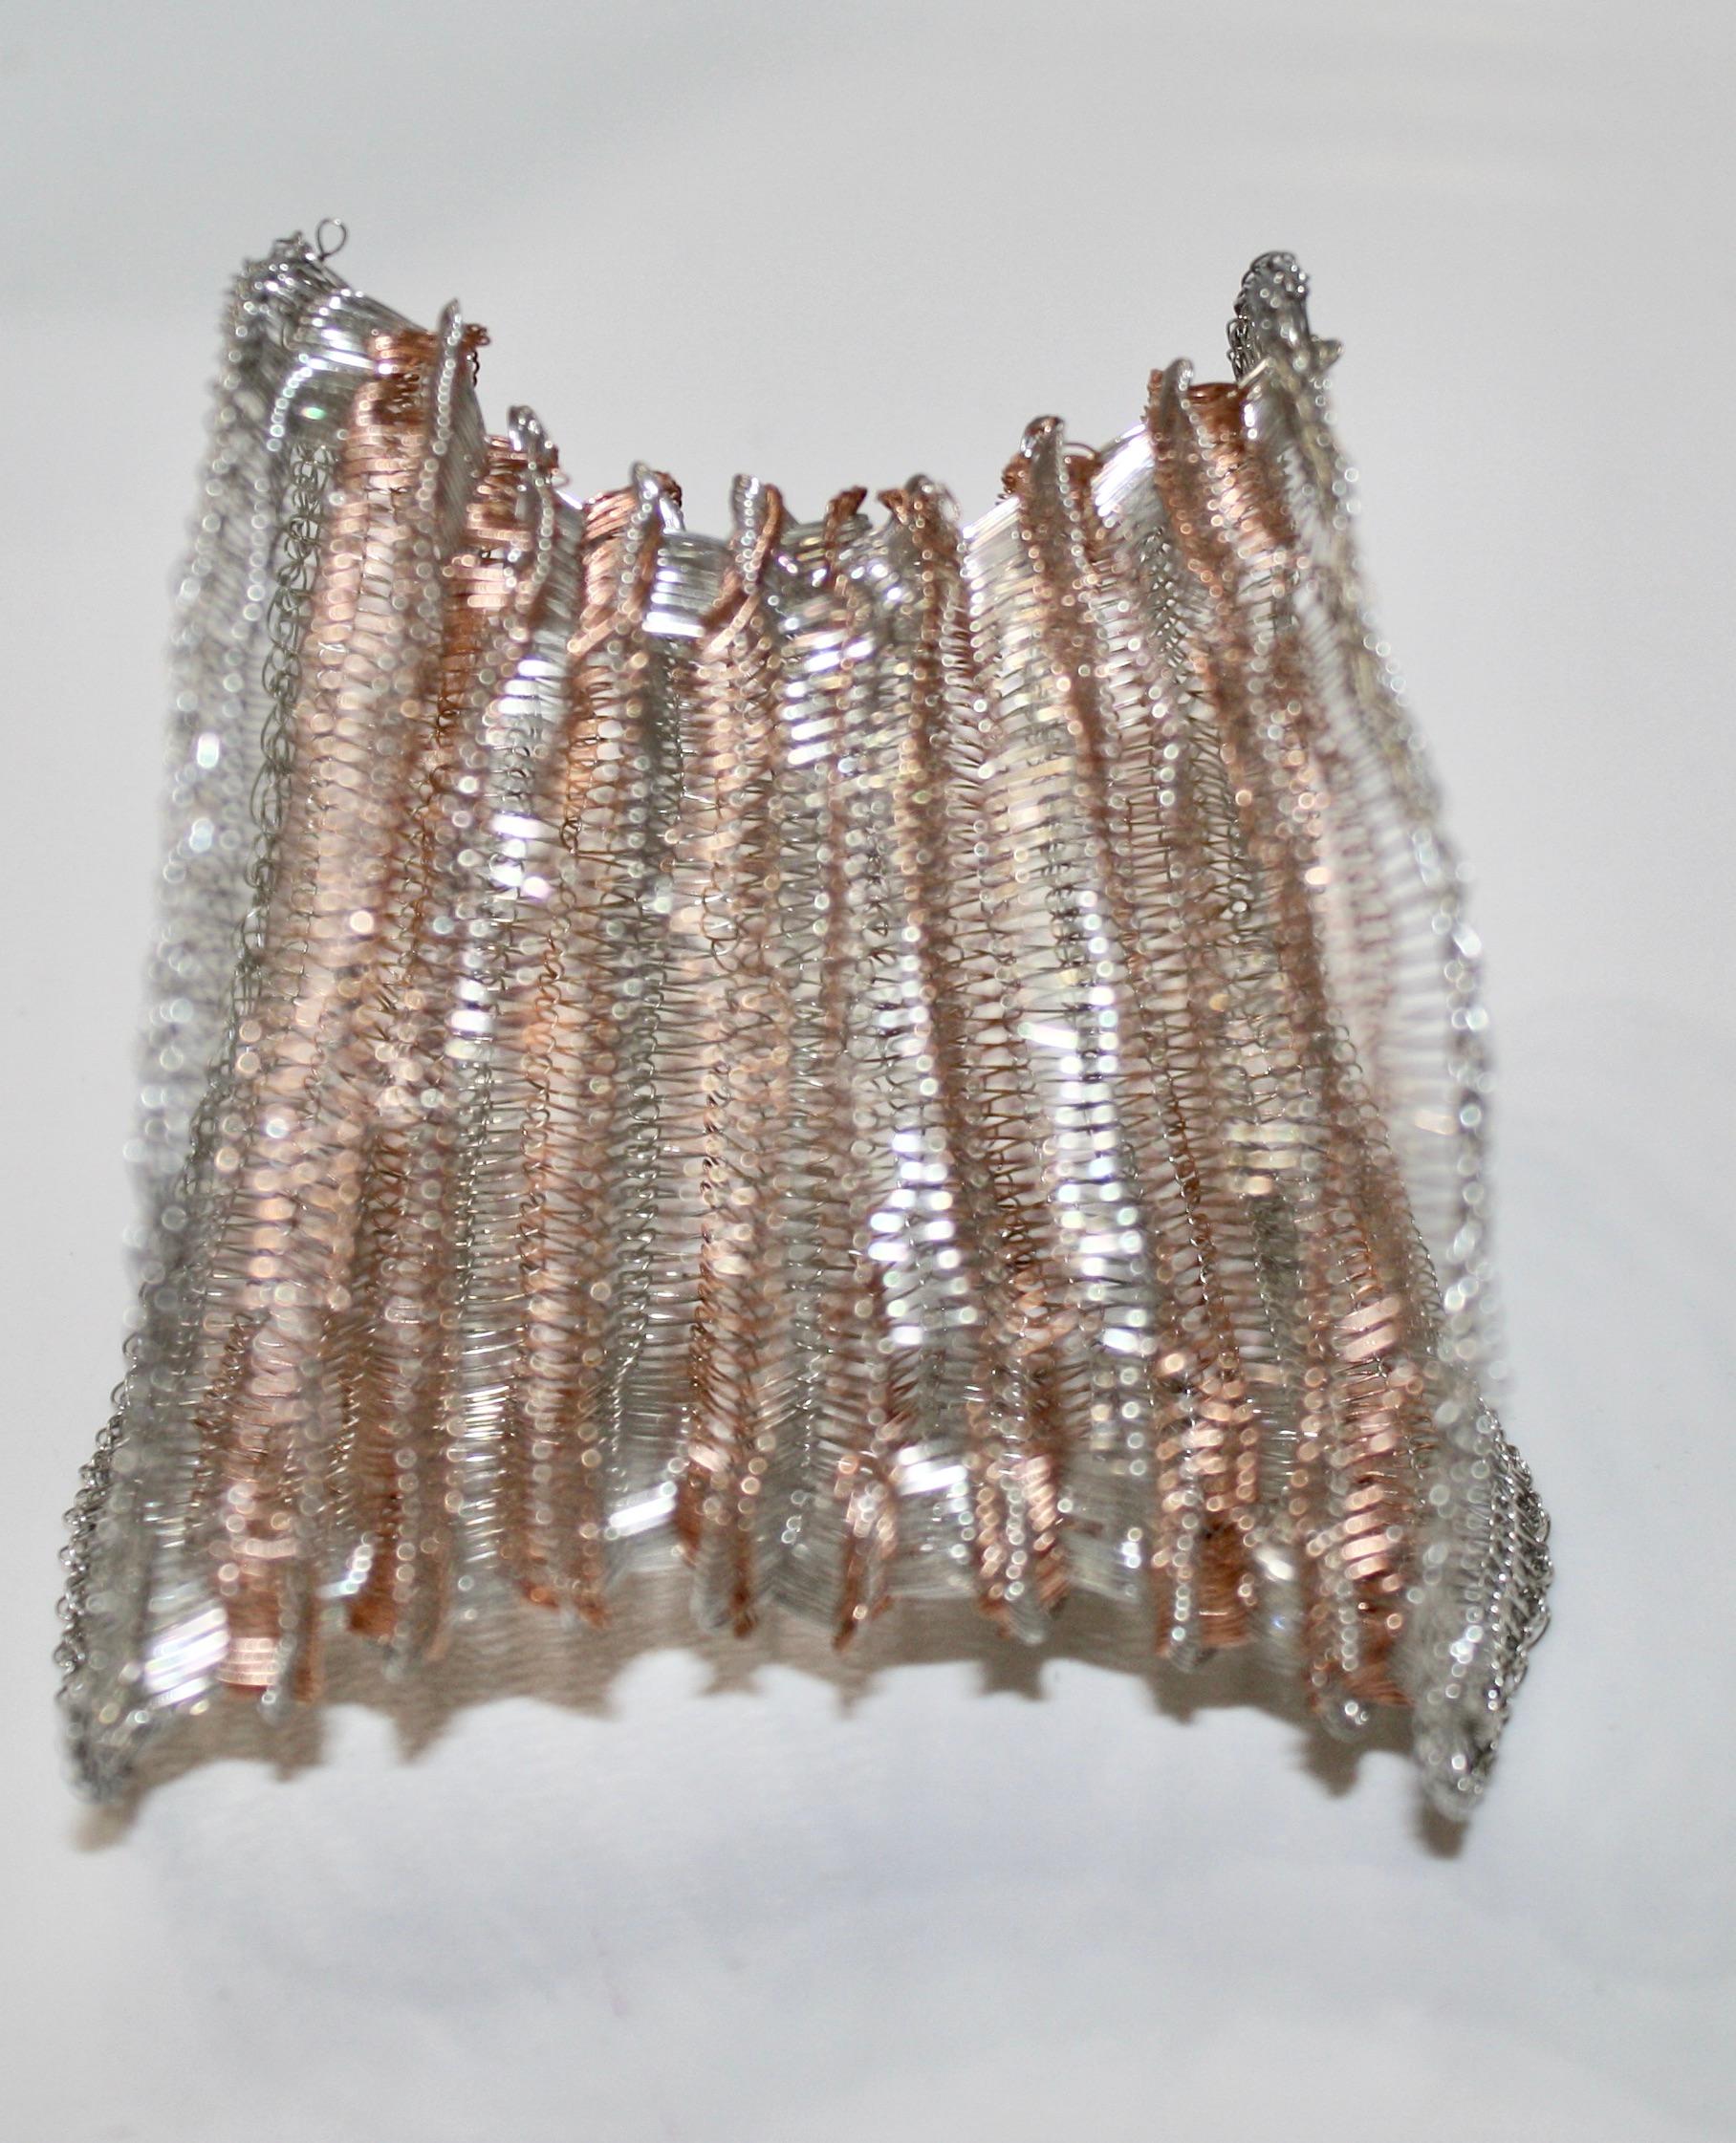 This edgy Milena Zu mesh bracelet is made of fine brass wire which has been partly silver plated and copper.
Italian born Milena Zu, who now resides in Ubud, Bali, works with local crafts people who are masters in an old crocheting technique.